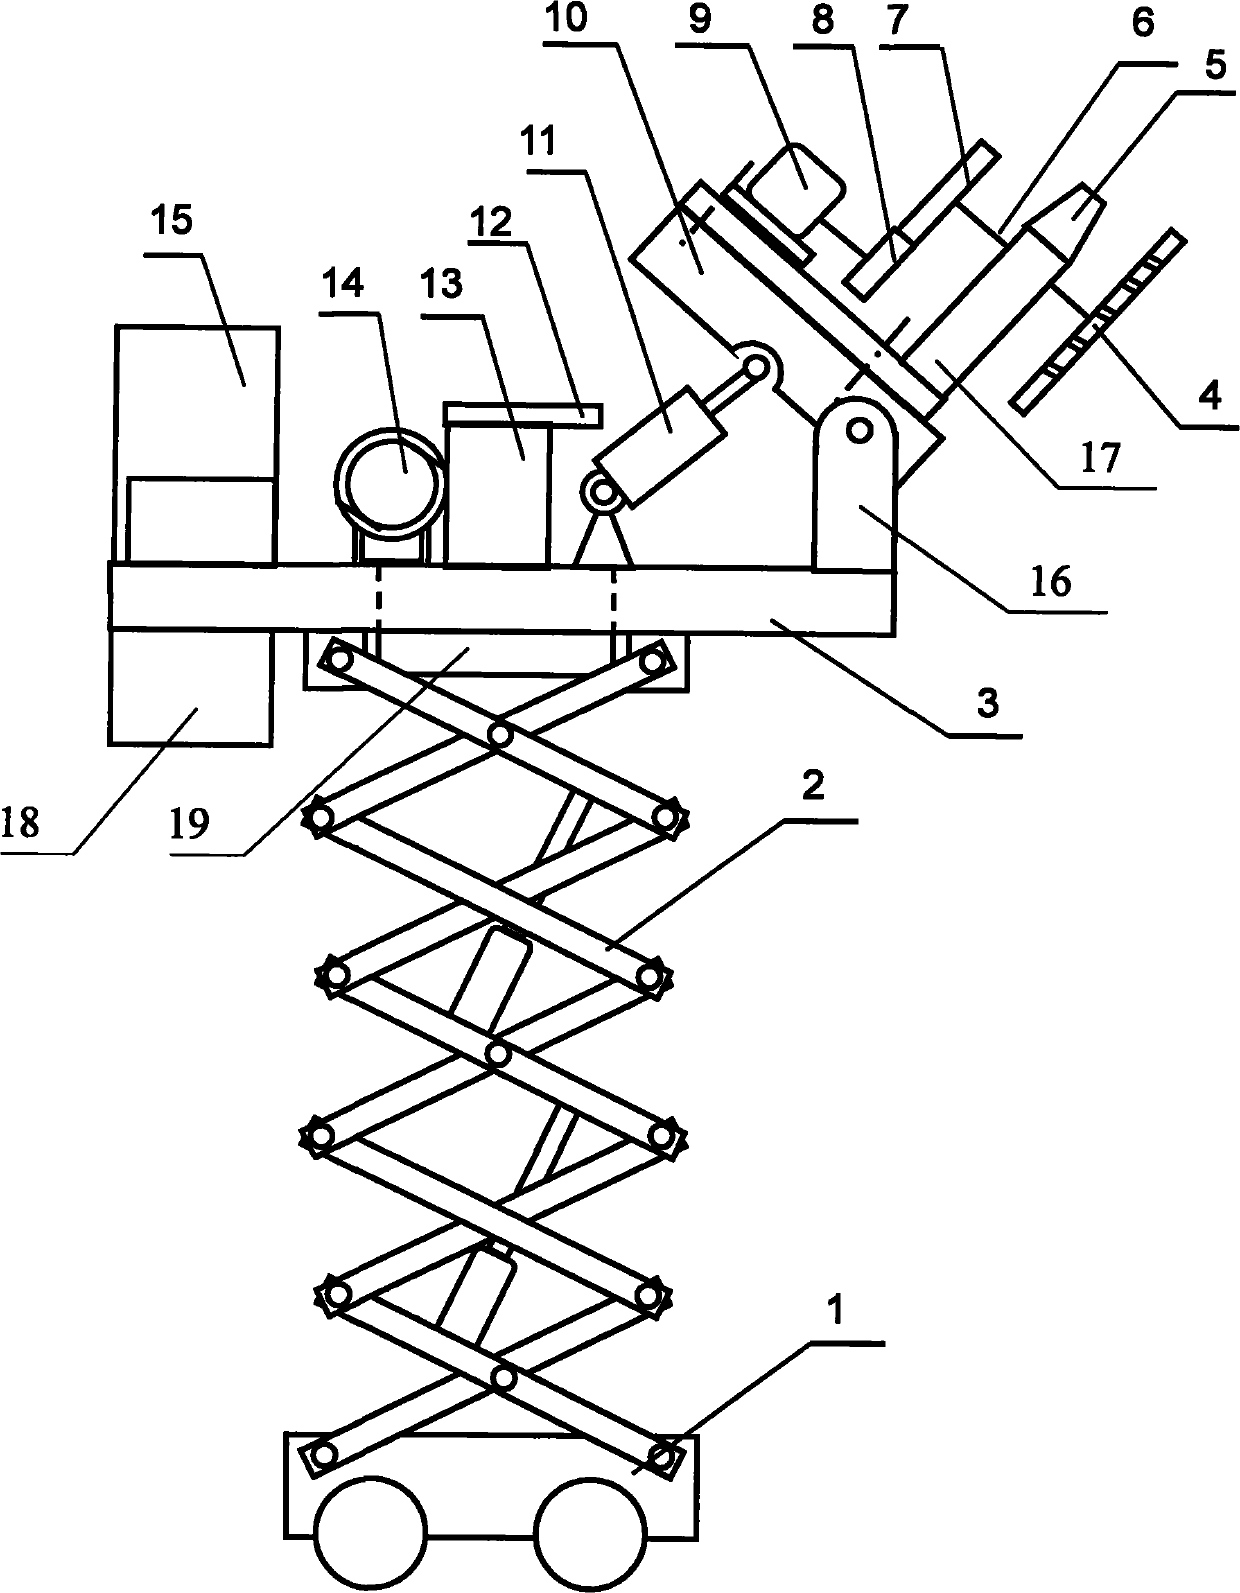 Arbor cropper capable of automatically adjusting cutter positions